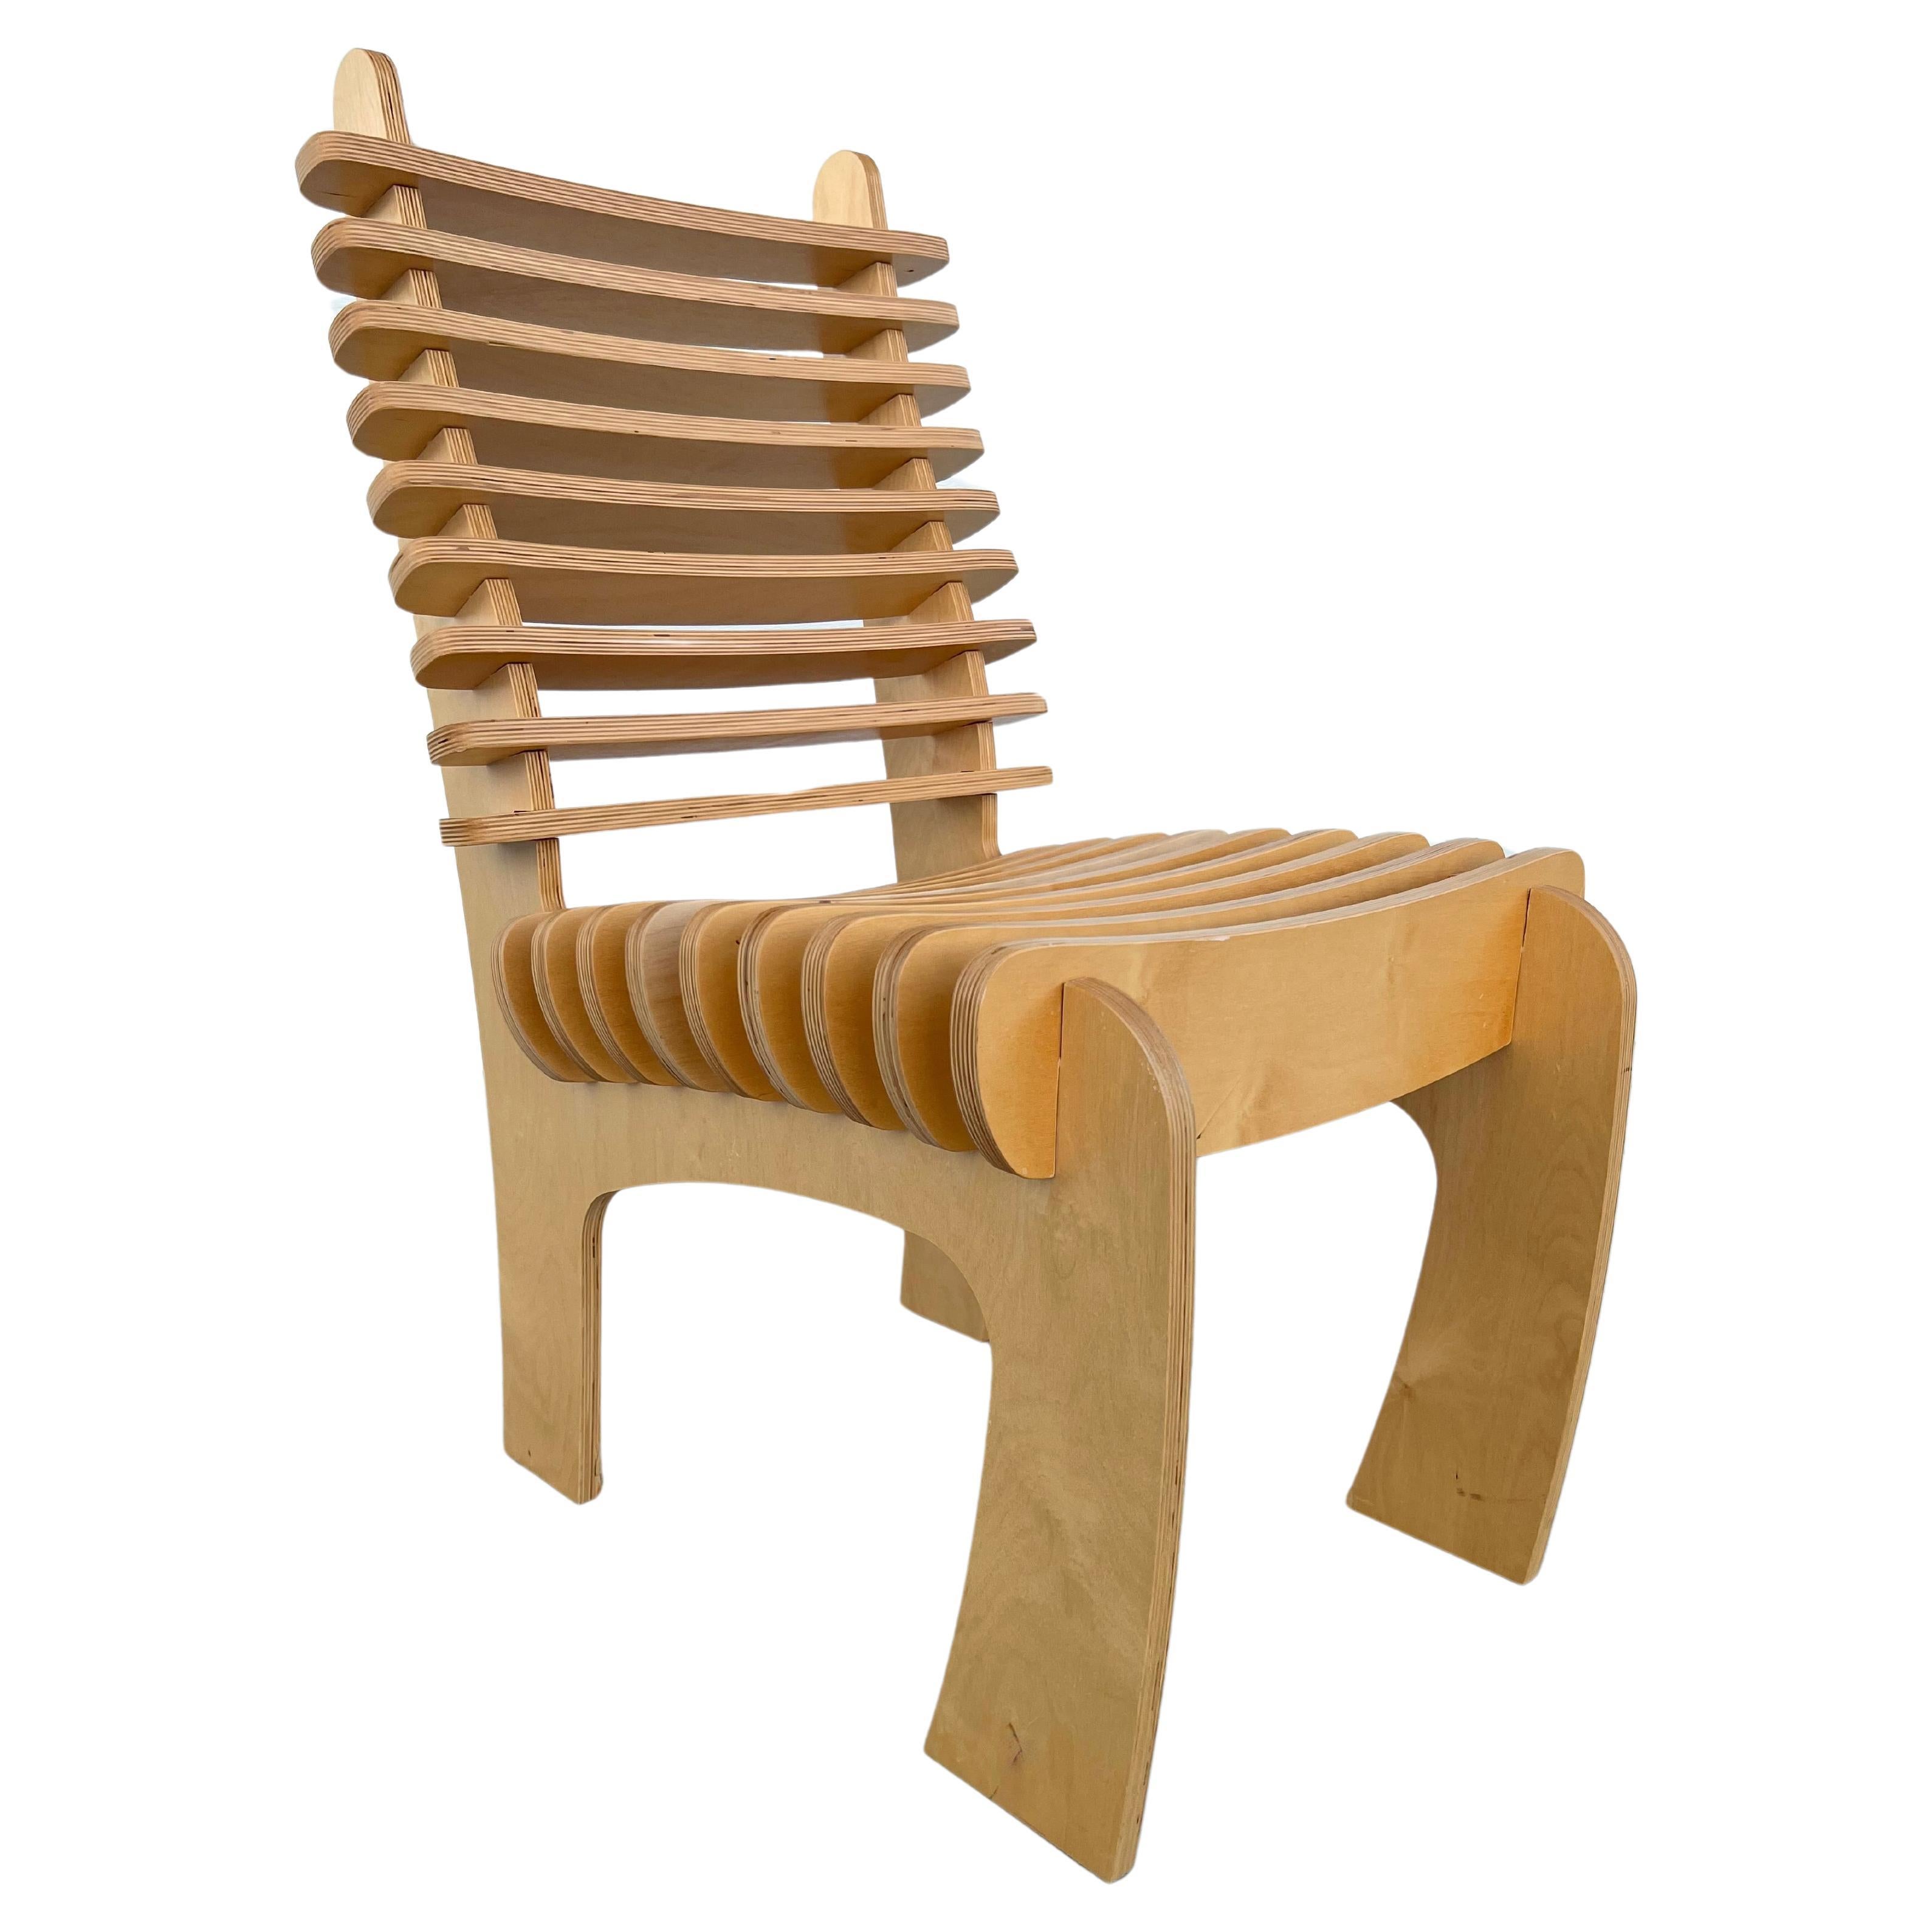 Modern Blond Plywood Minimalist Slat Side Chair Art Architectural Piece For Sale